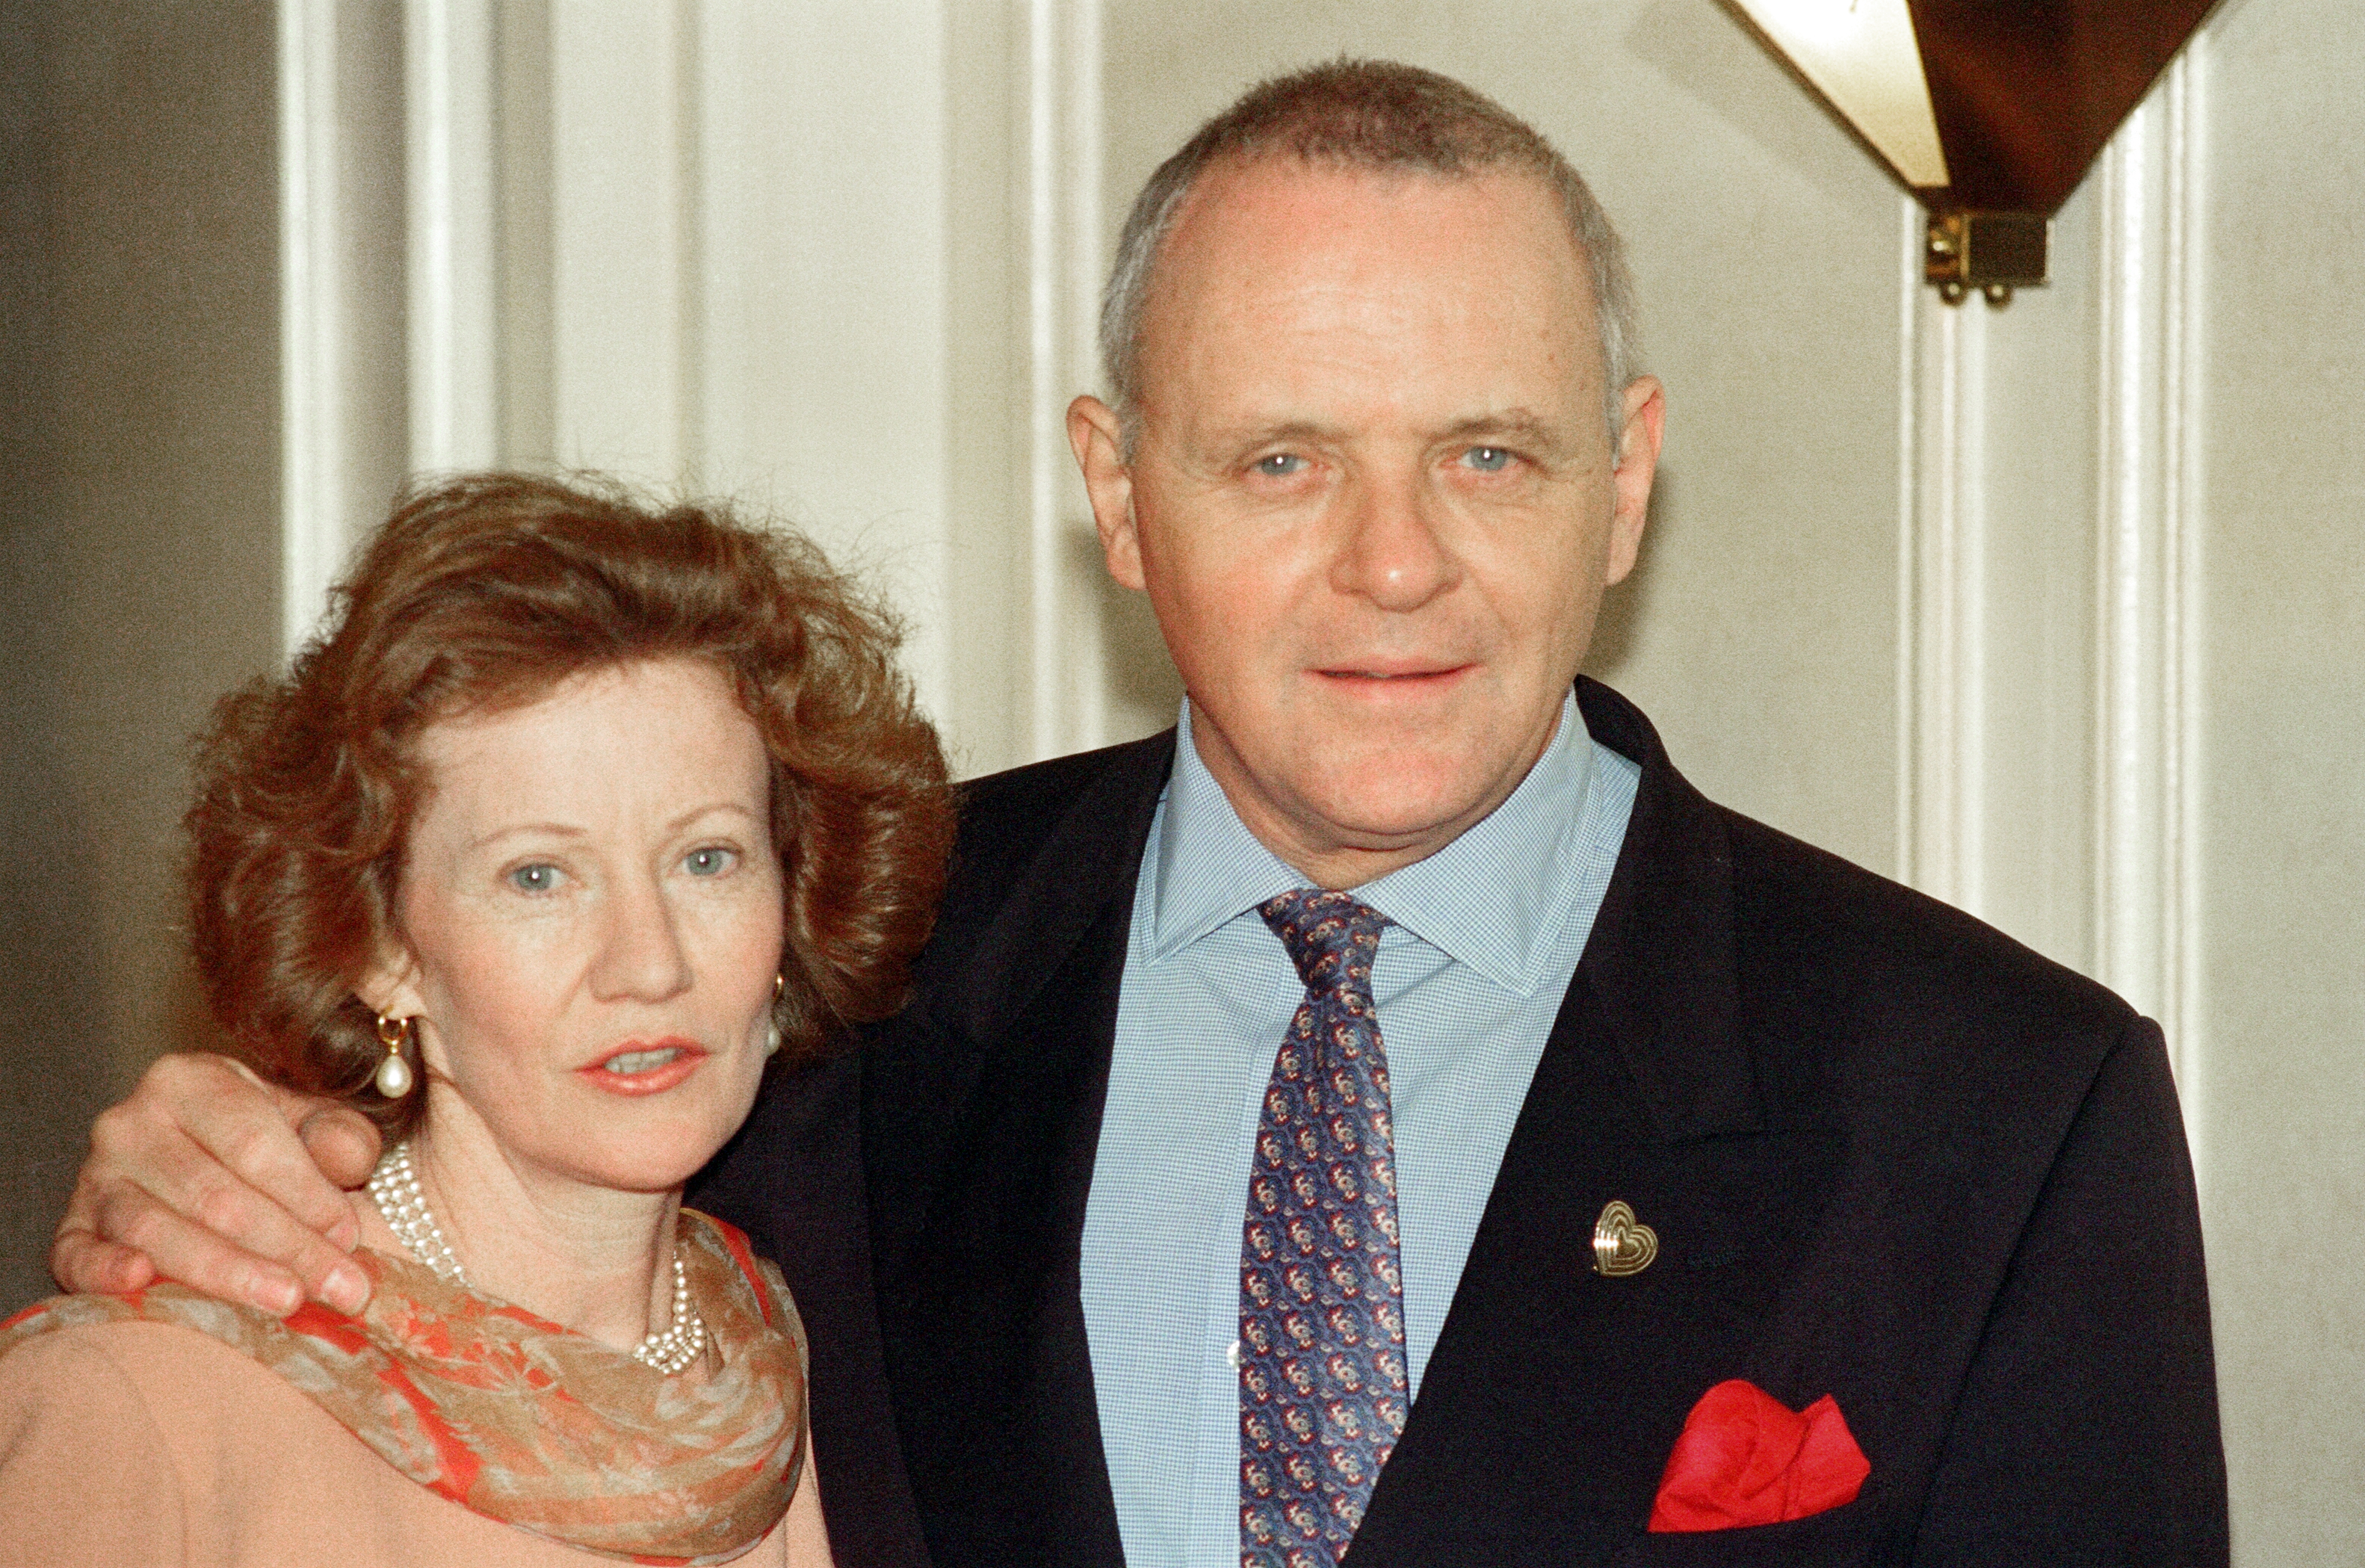 Anthony Hopkins and Jennifer Lynton, at the Variety Club Show Business awards, on February 1, 1994. | Source: Getty Images